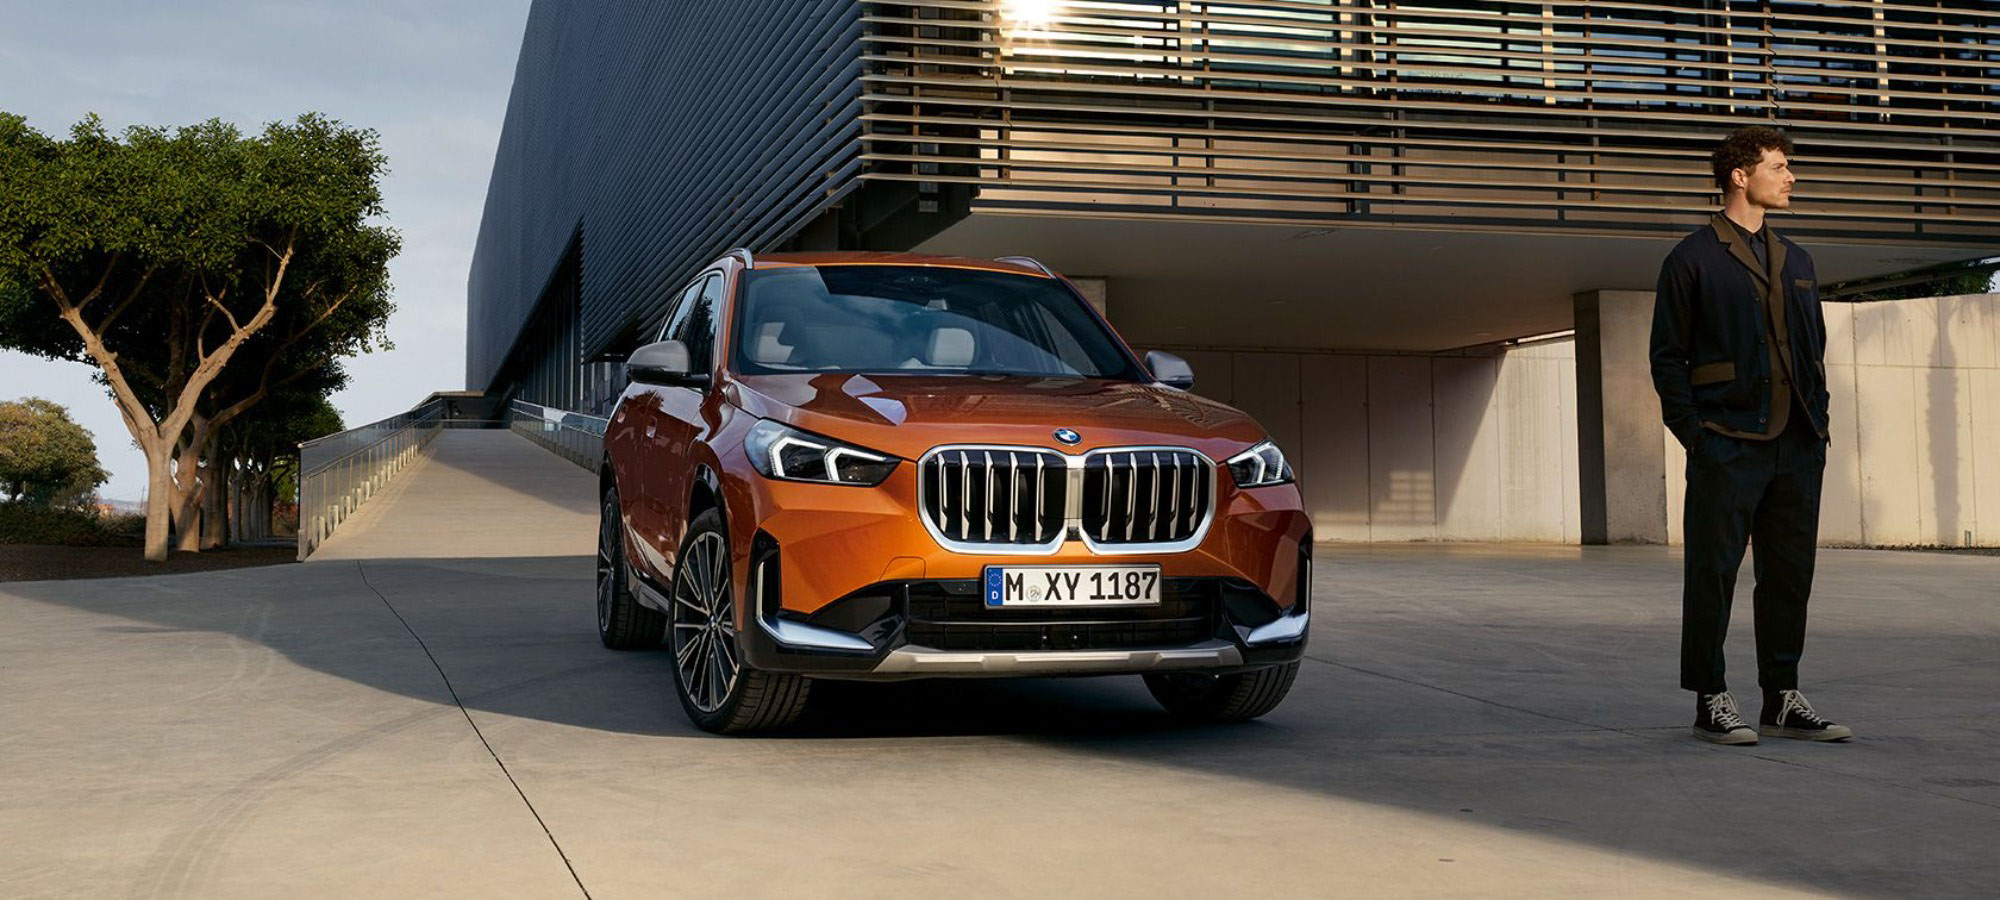 Versatile and Capable: The New BMW X1 11